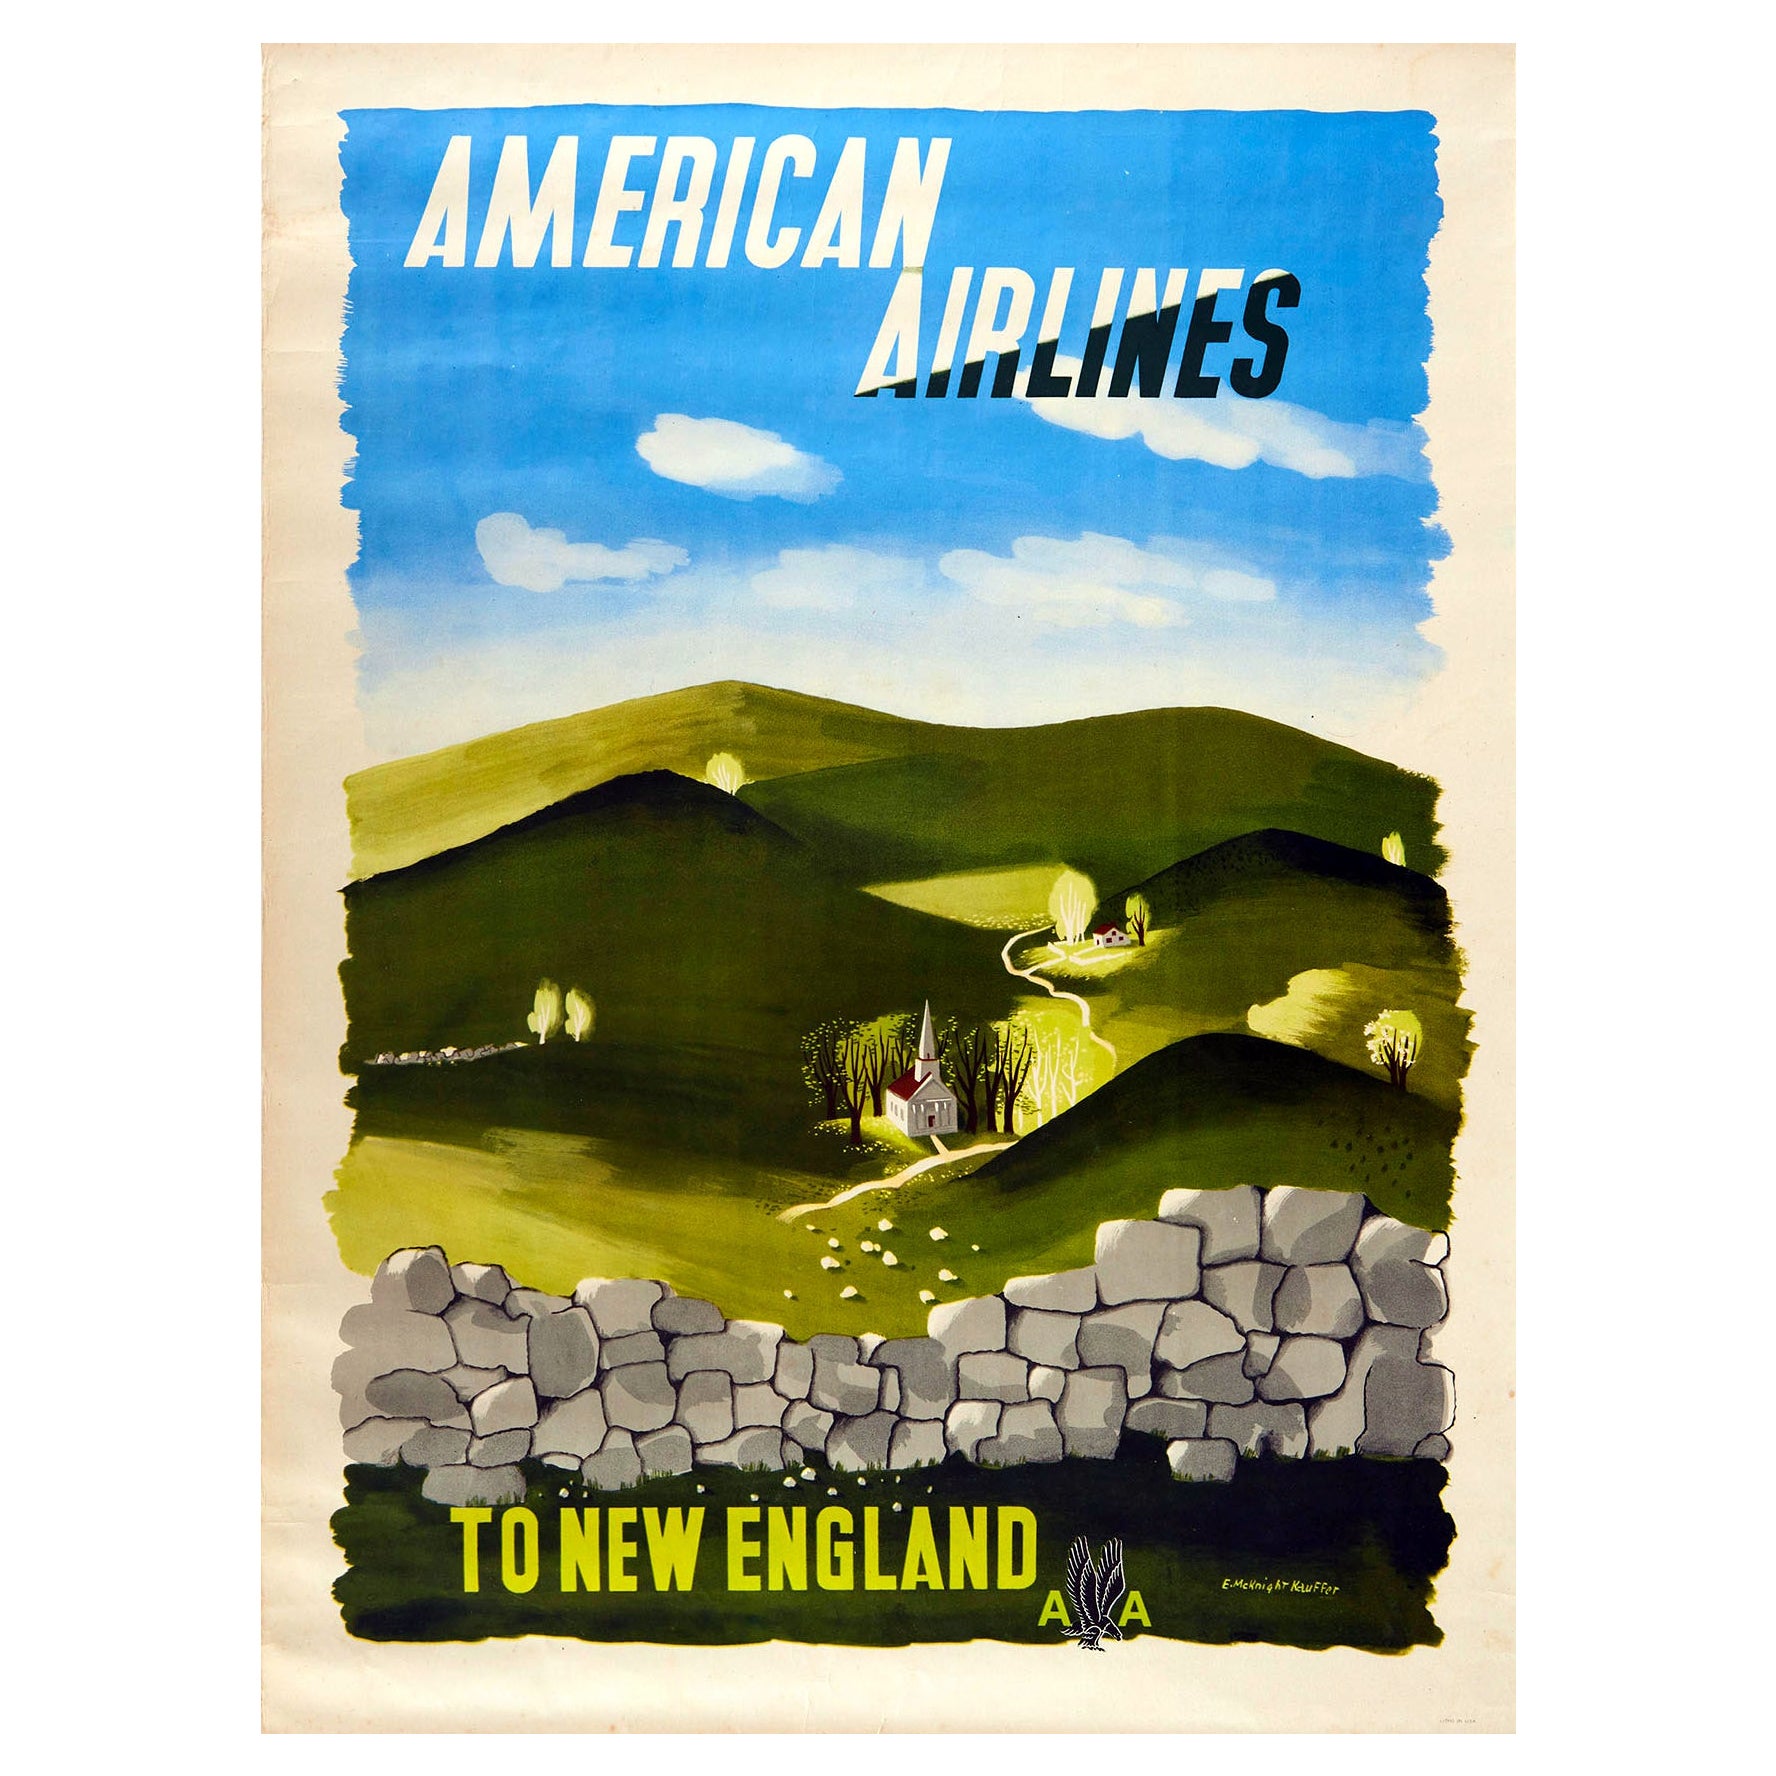 Original Vintage Travel Poster American Airlines To New England McKnight Kauffer For Sale